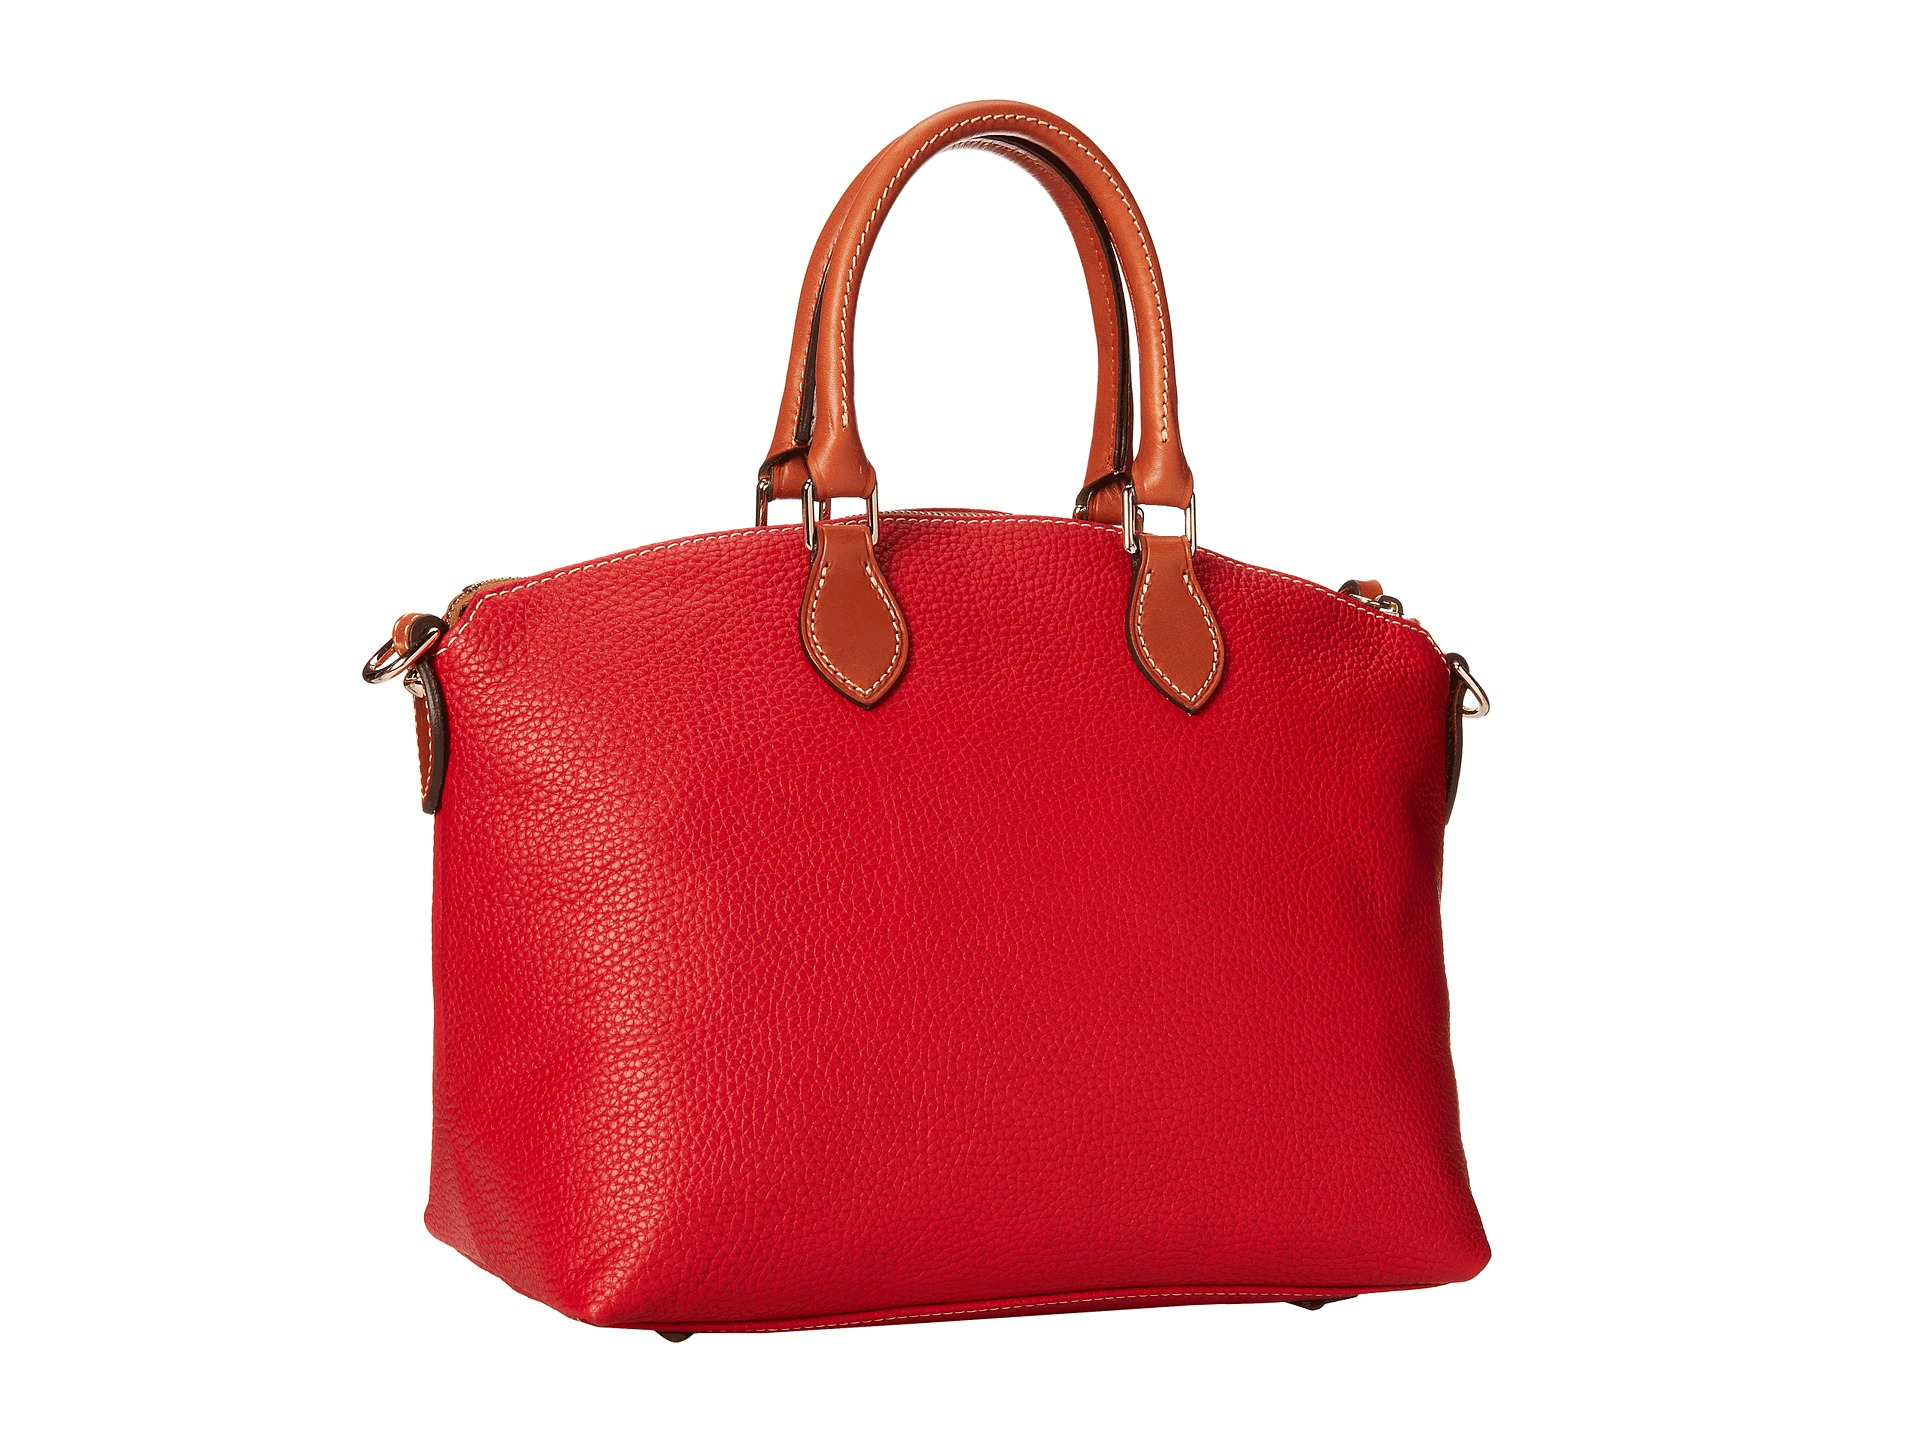 Lyst - Dooney & Bourke Pebble Leather Domed Satchel in Red